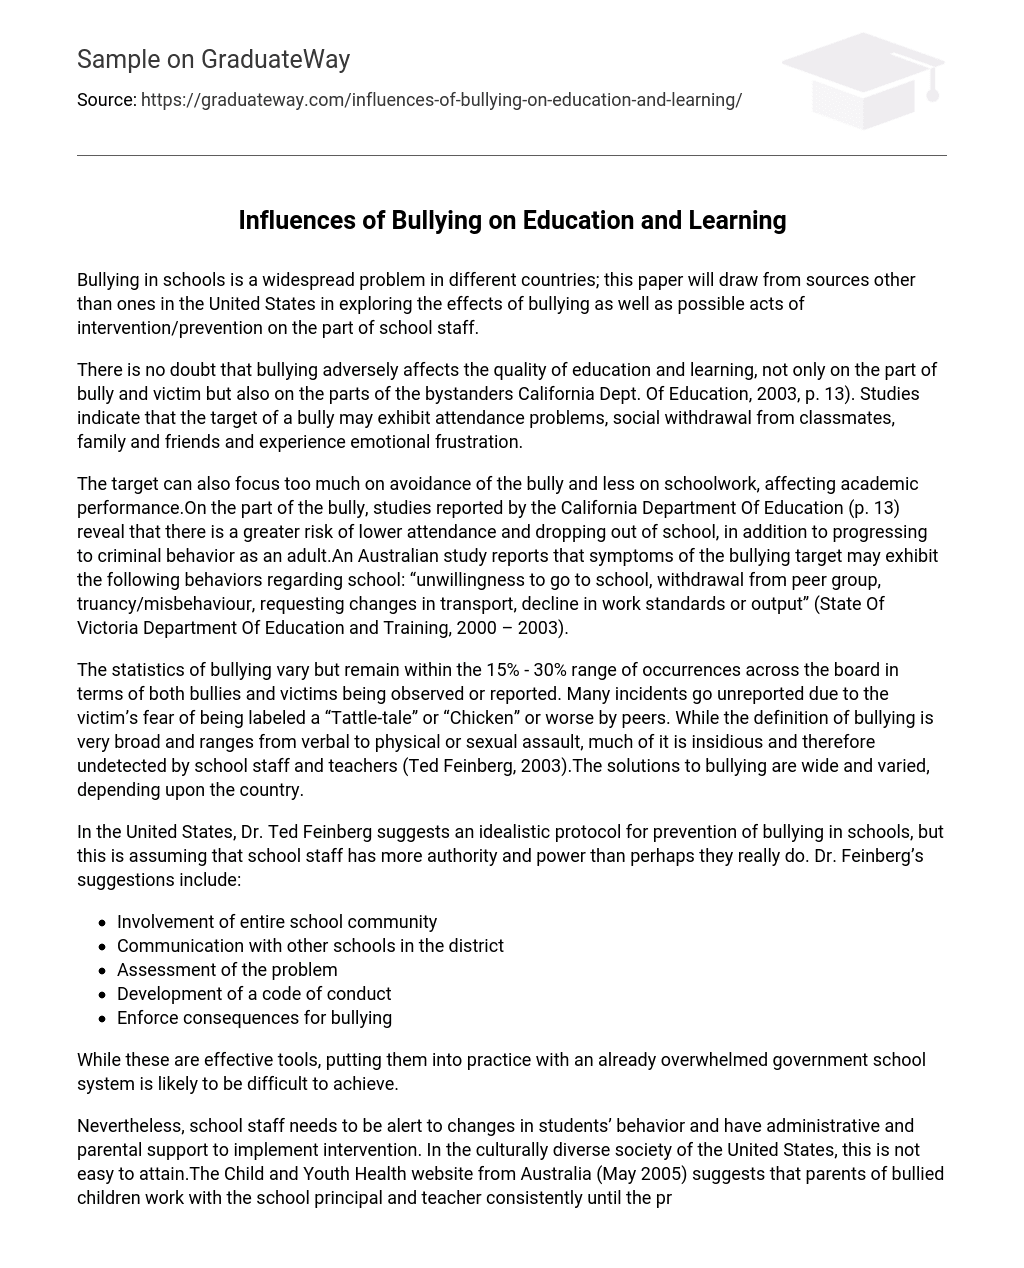 Influences of Bullying on Education and Learning